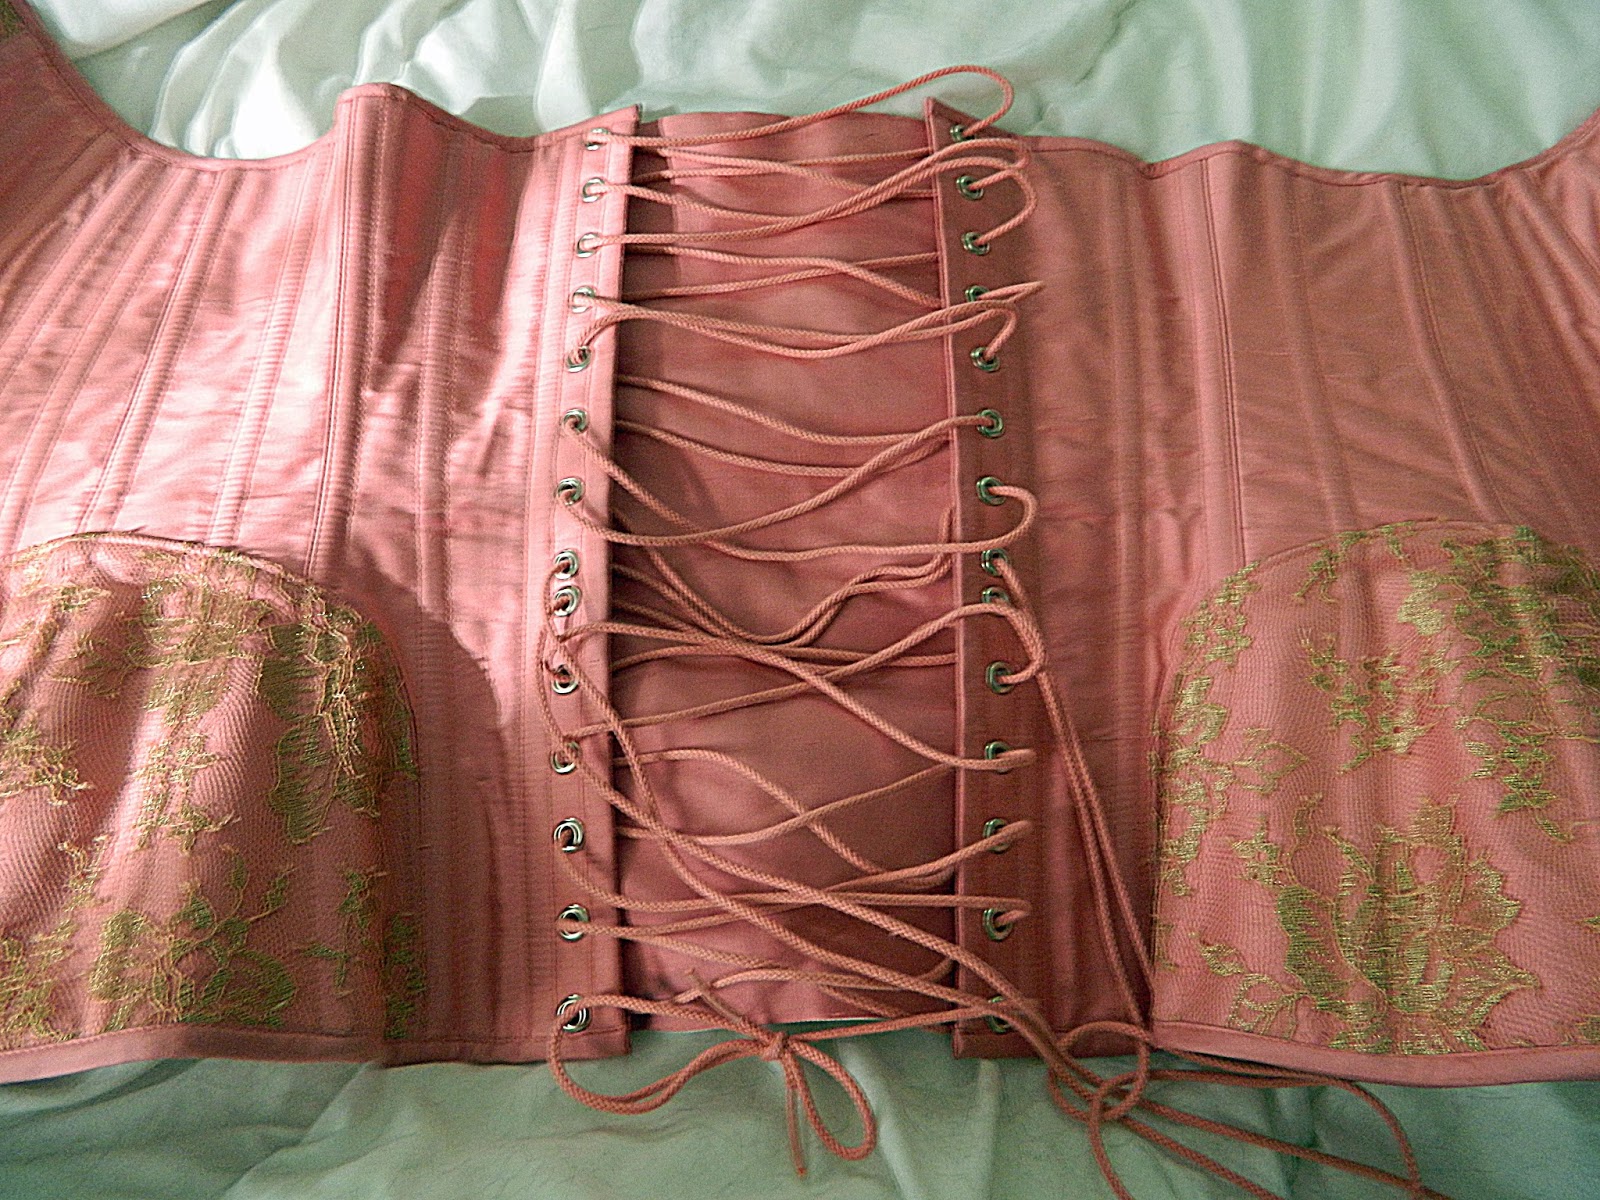 Overbust corset choose your color and size by AngelaFriedman, $475.00